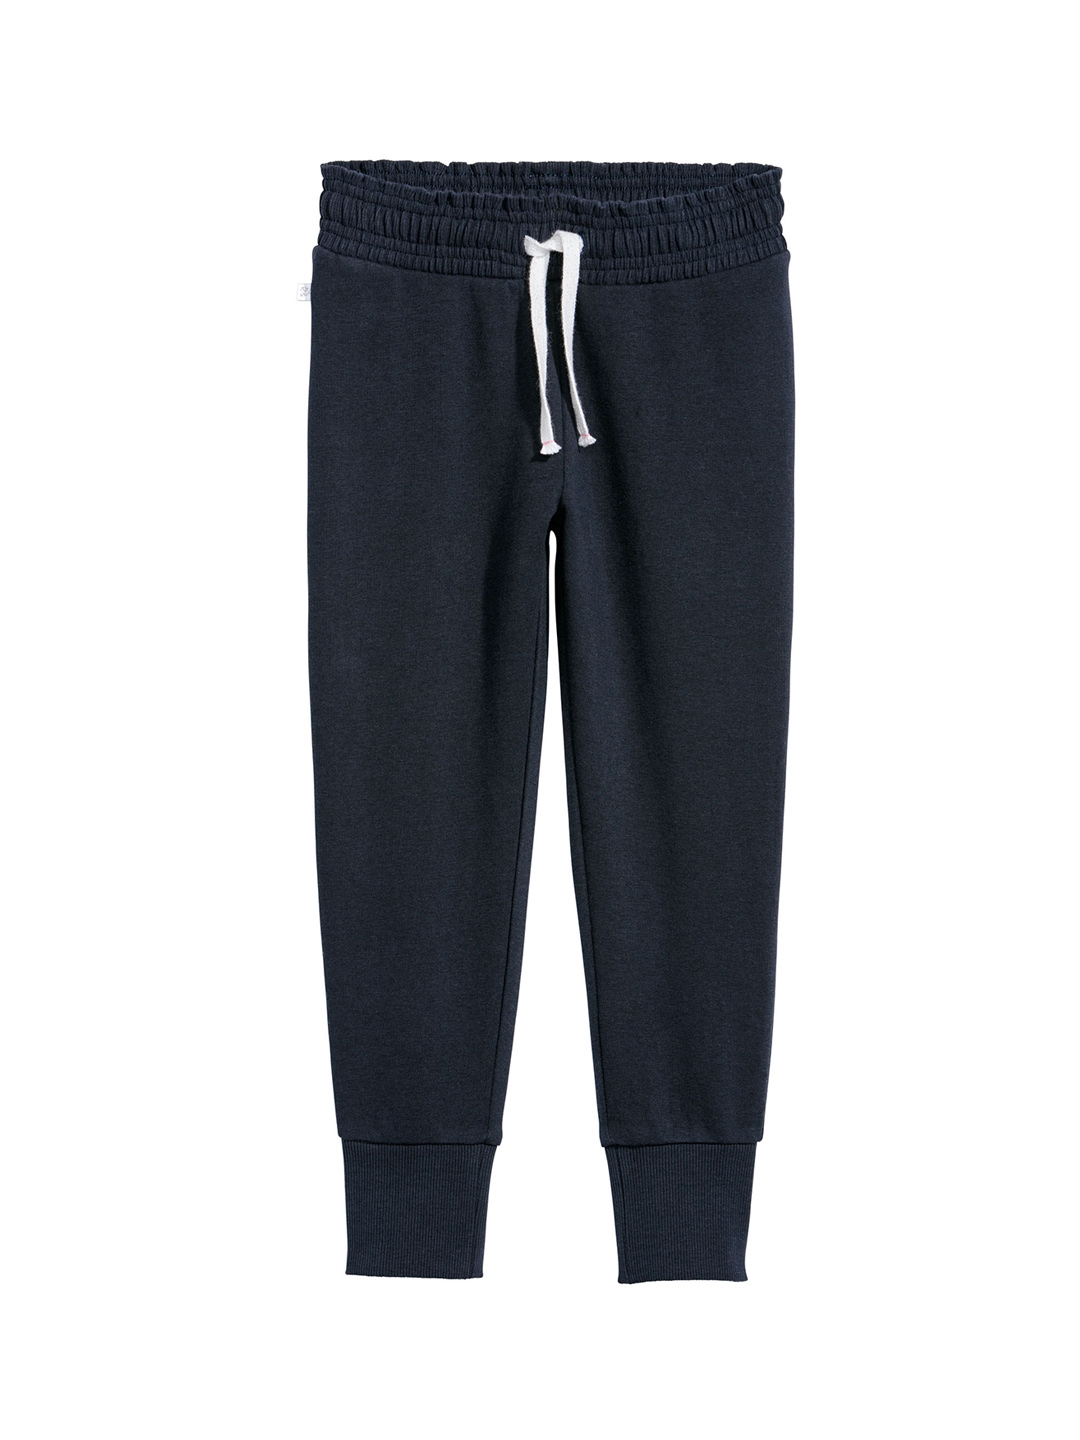 Buy H&M Girls Blue Joggers - Trousers for Girls 10470124 | Myntra